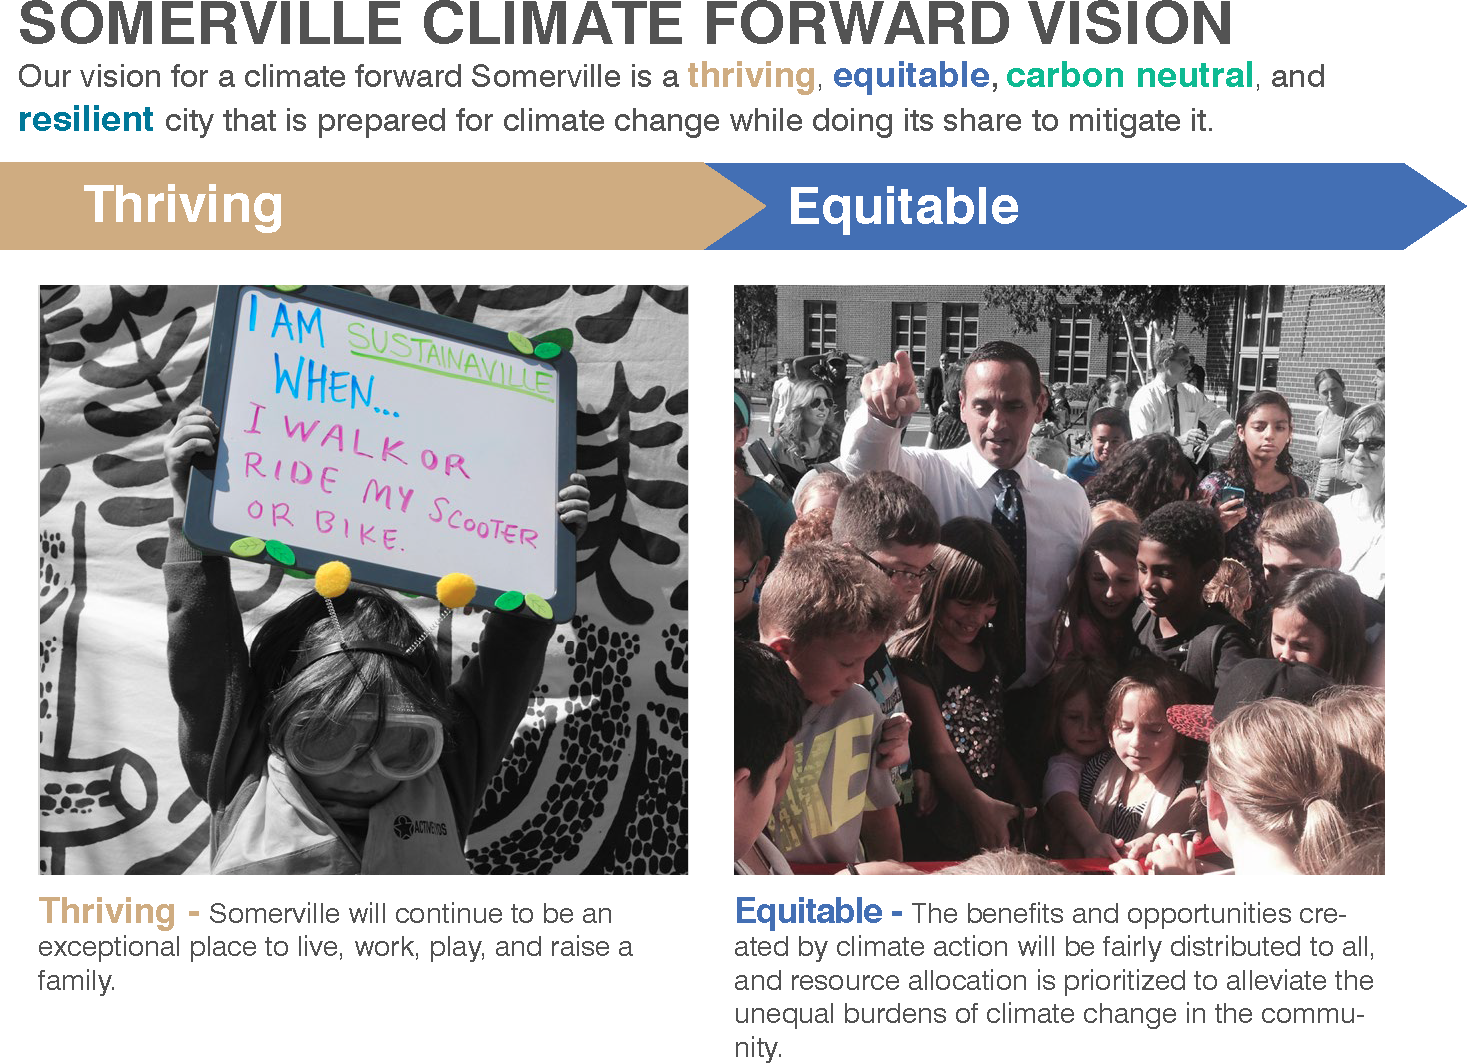 Our vision for a climate forward Somerville is thriving, equitable, carbon neutral, and resilient city.